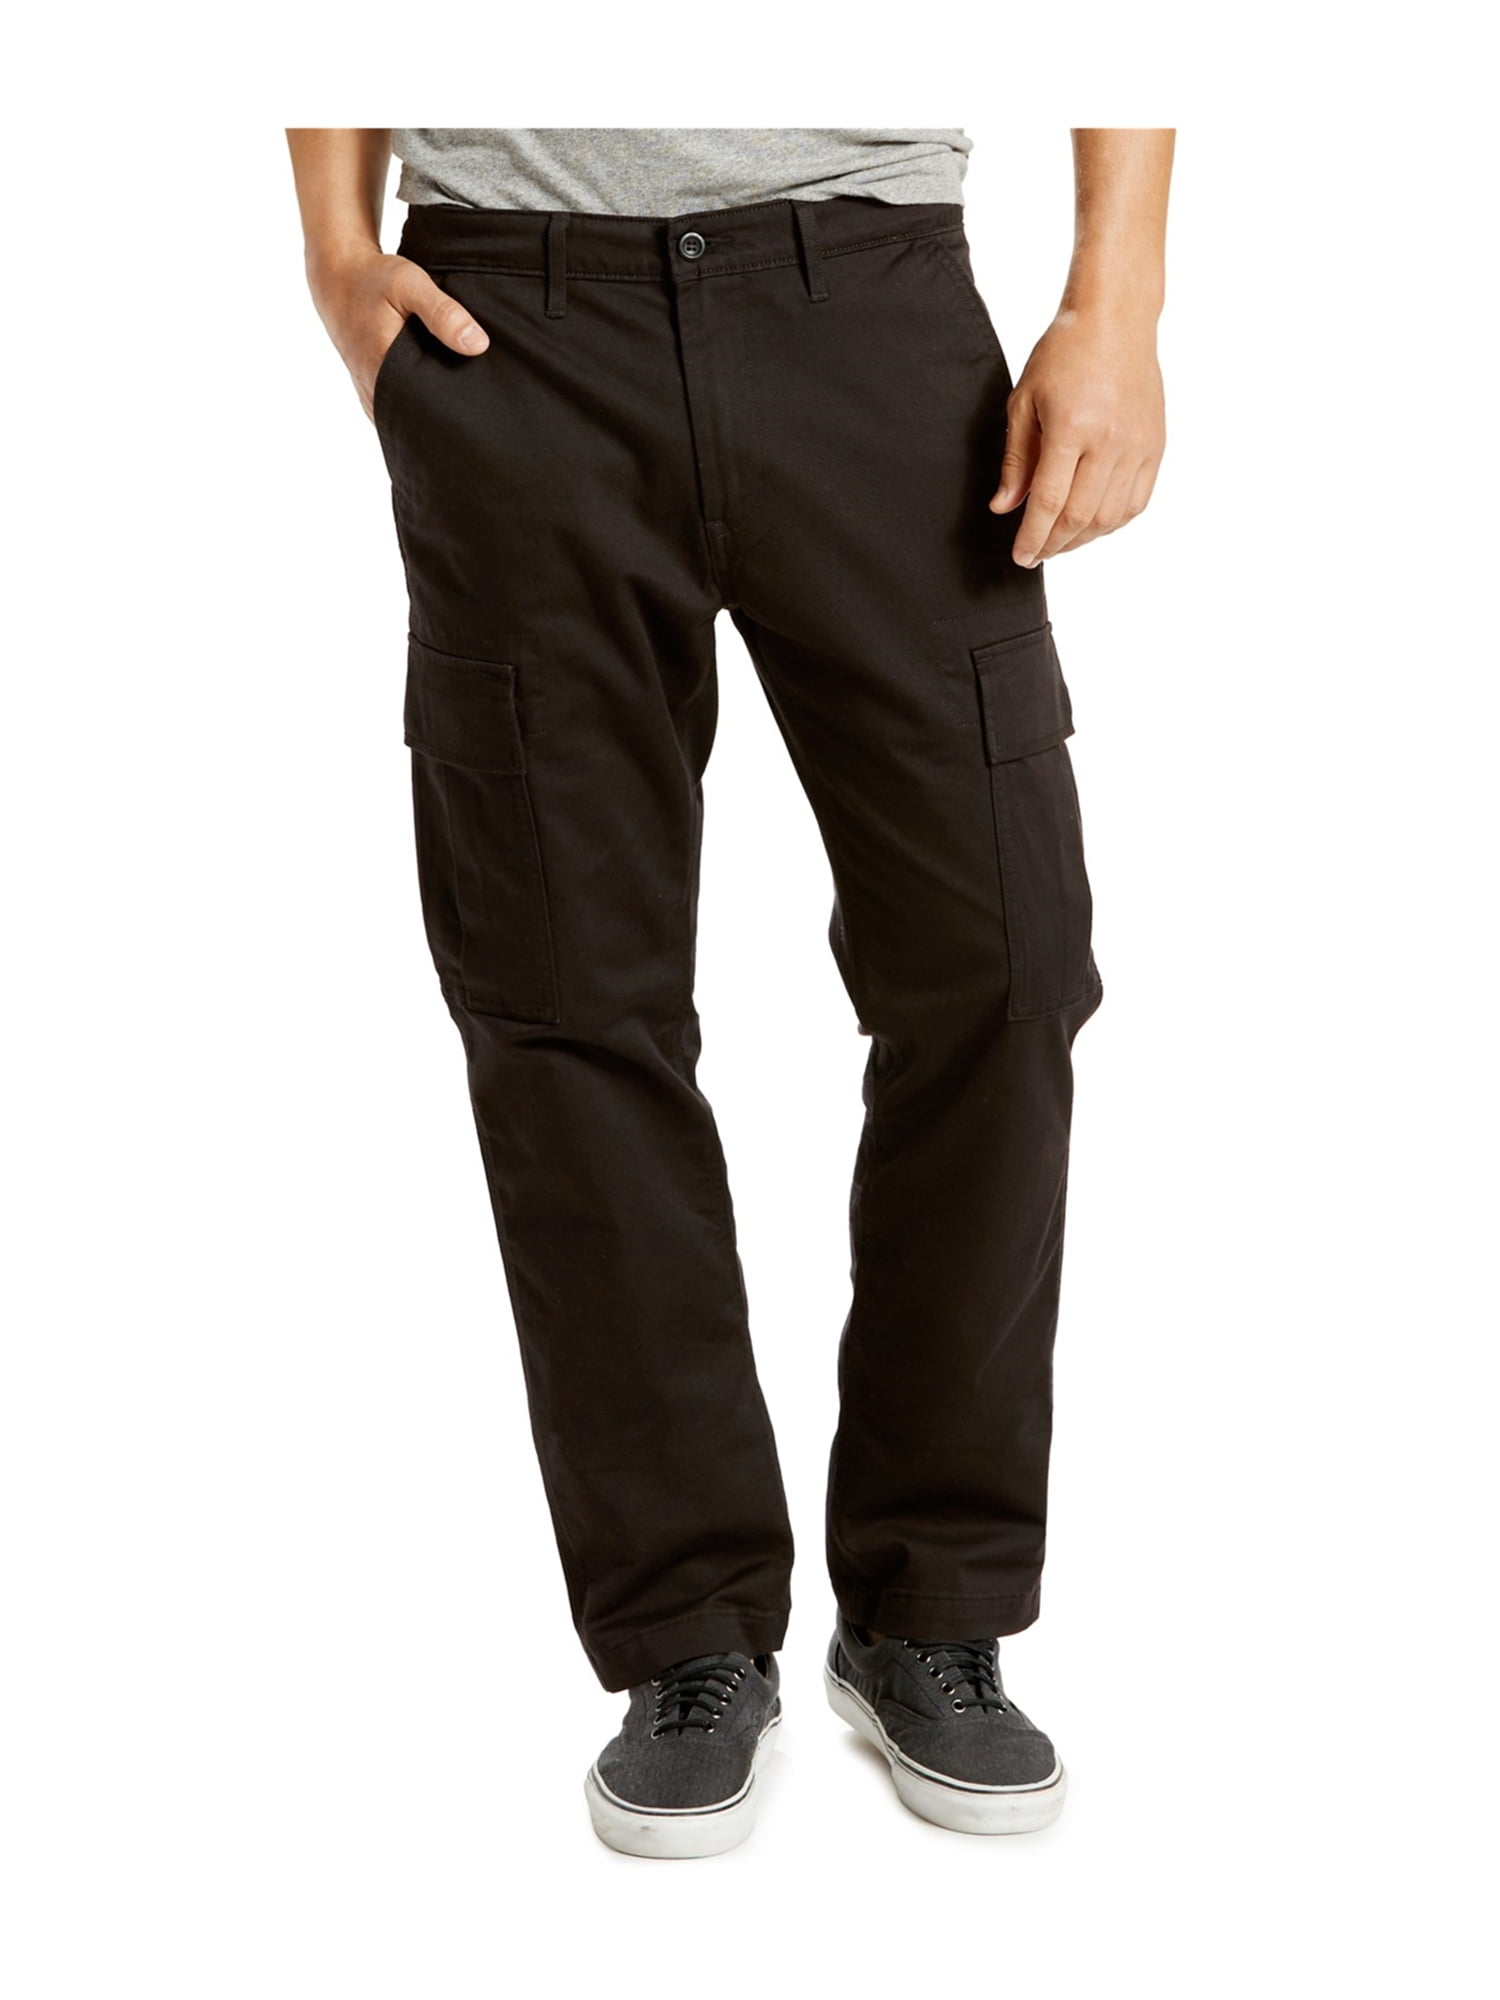 Levi's Mens Regular-Fit Athletic Casual Chino Pants black 32x32 ...